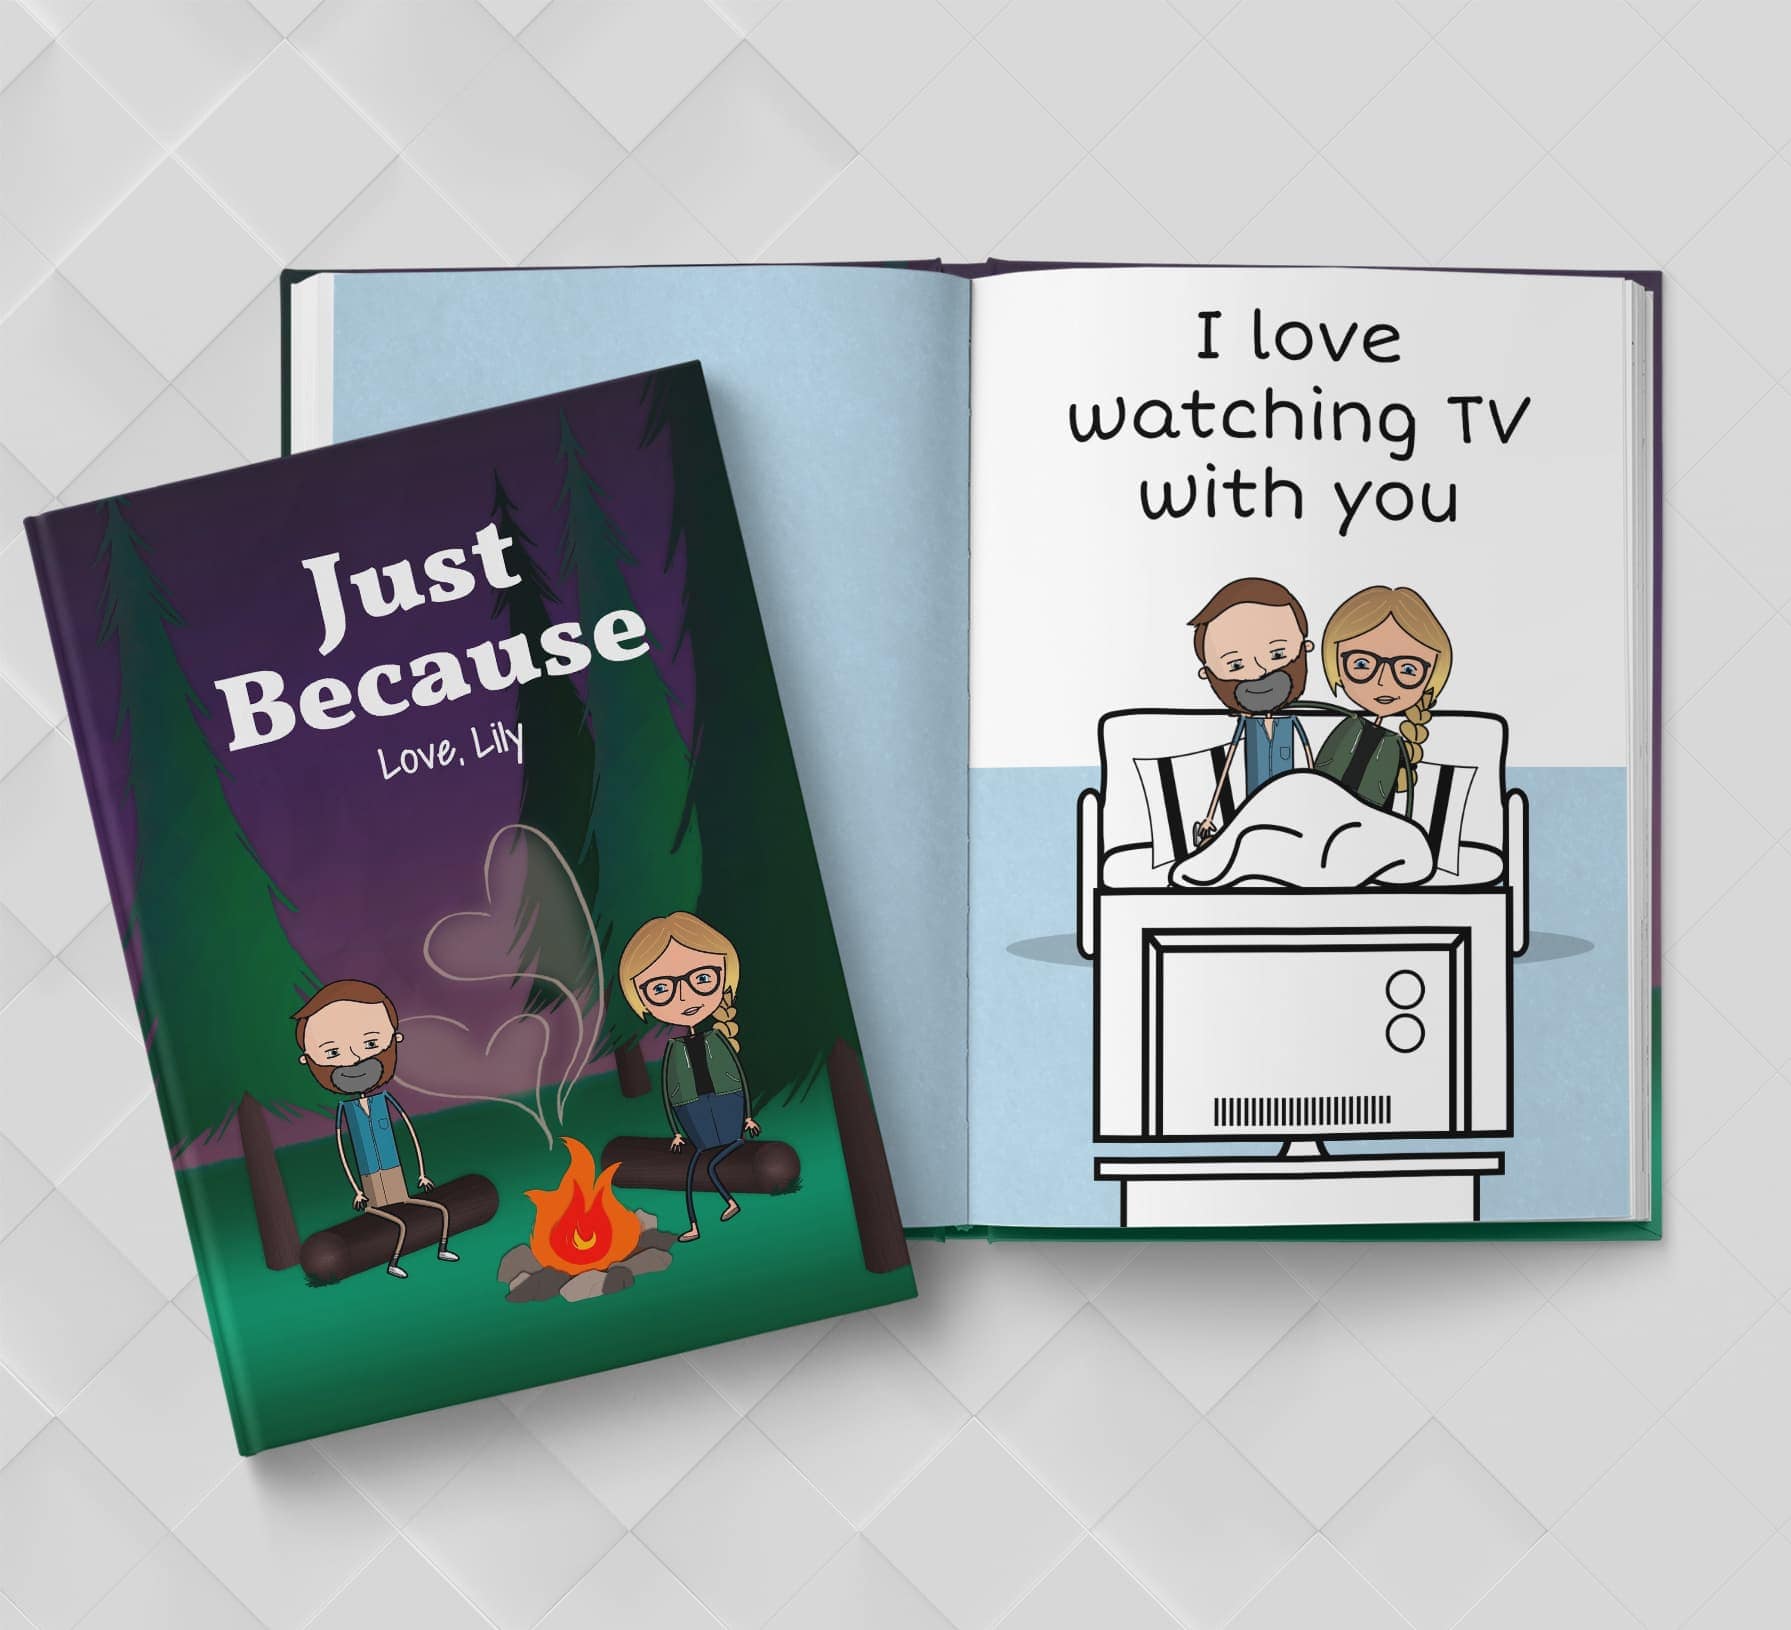 make-your-own-personalized-books-for-family-friends-lovebook